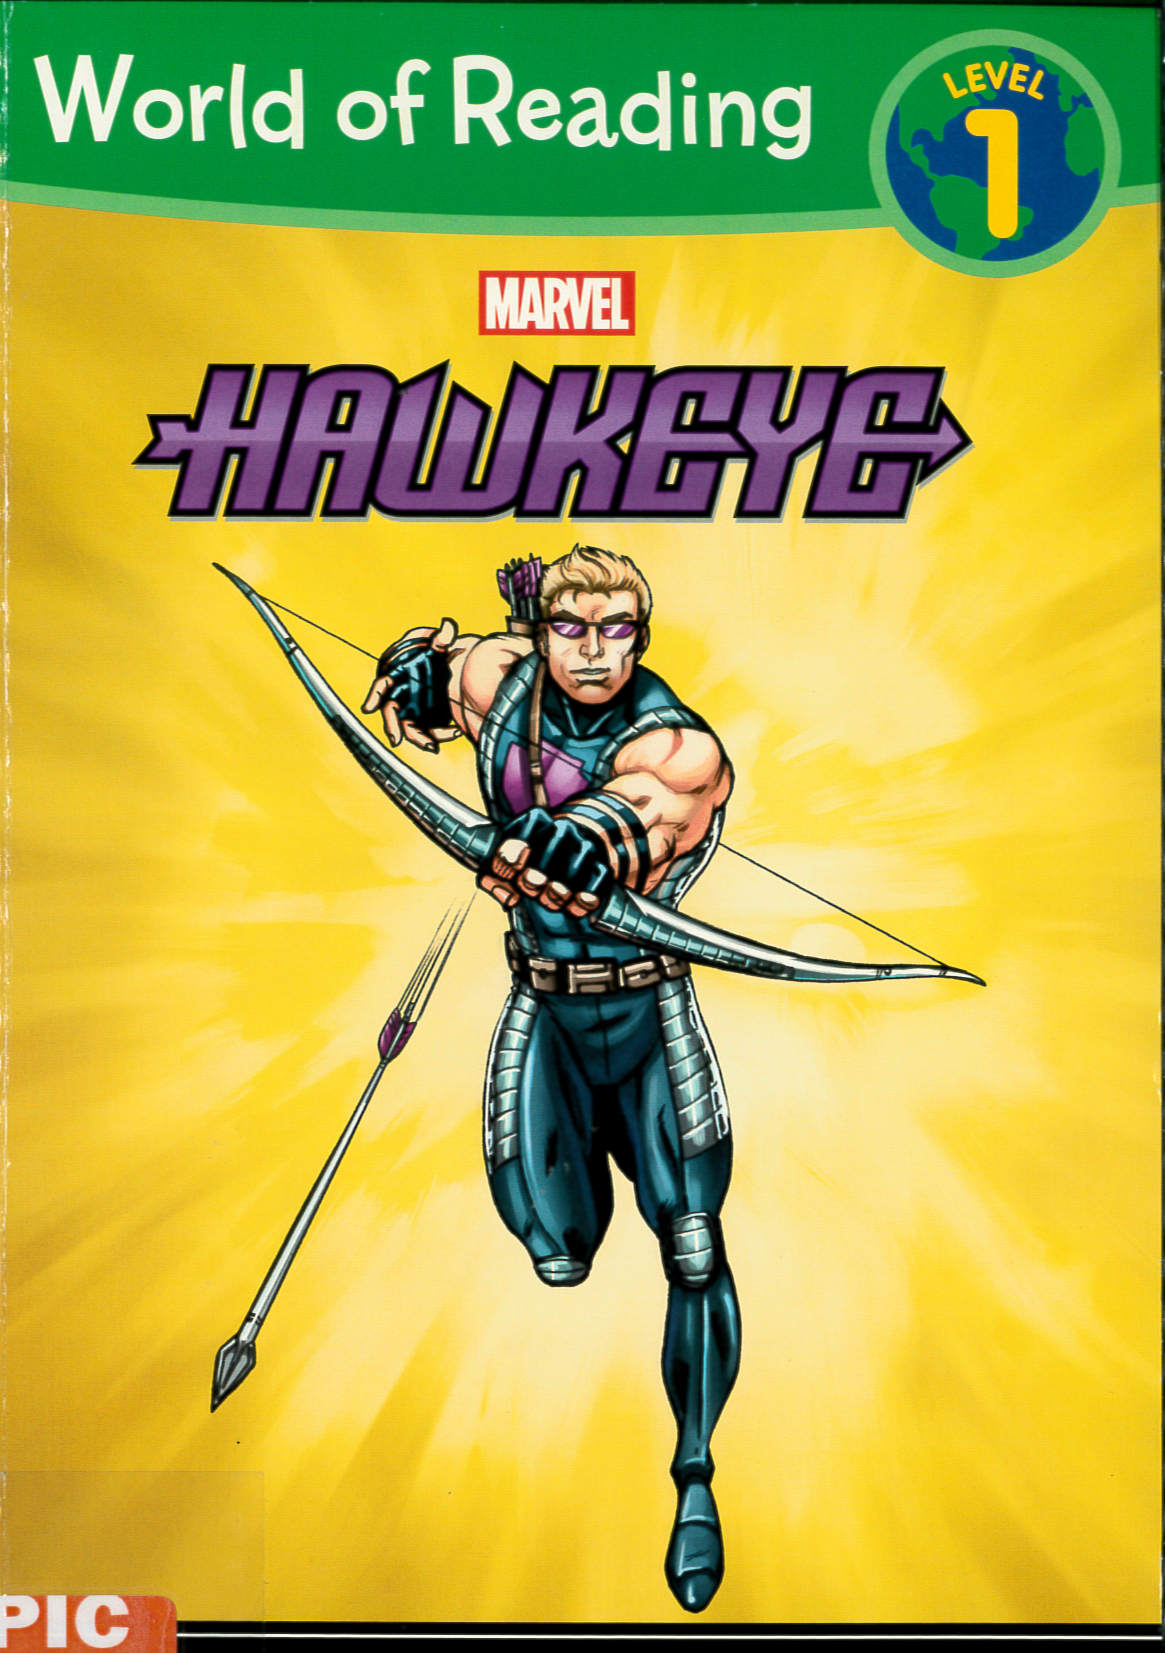 This is Hawkeye /